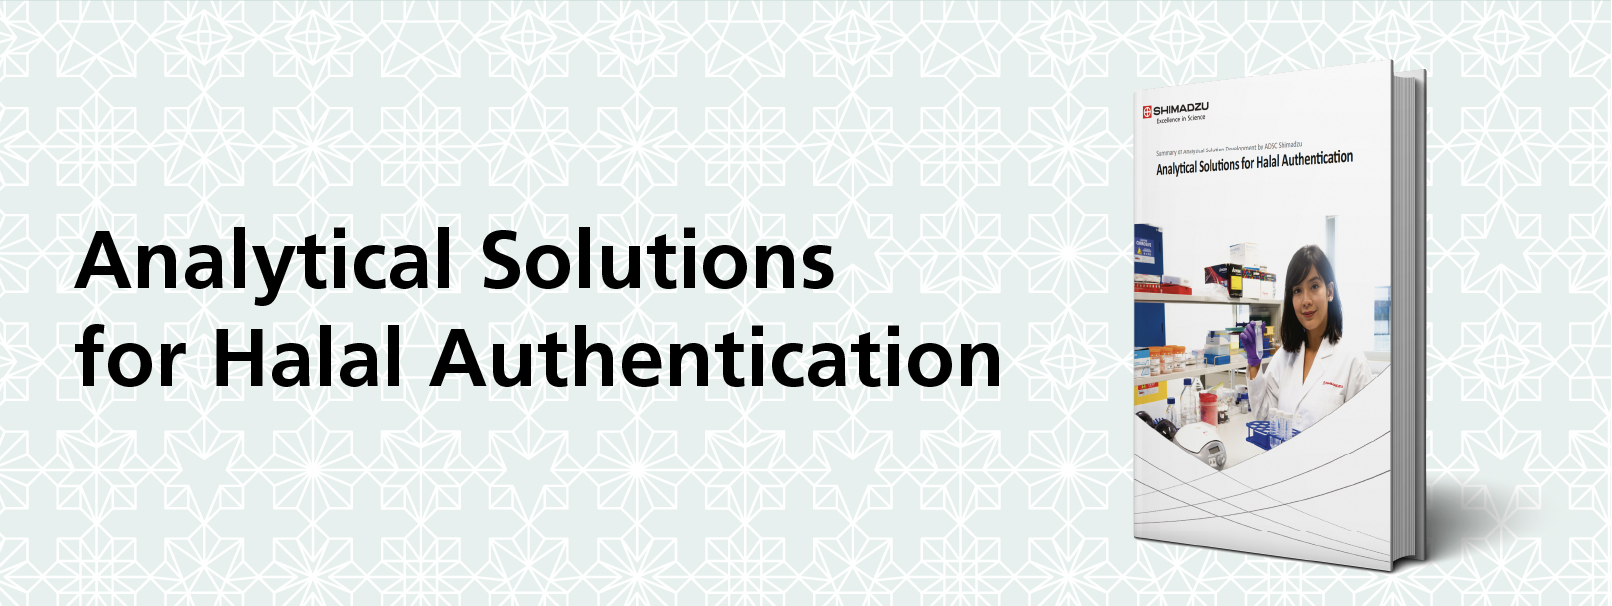 Analytical Solutions for Halal Authentication